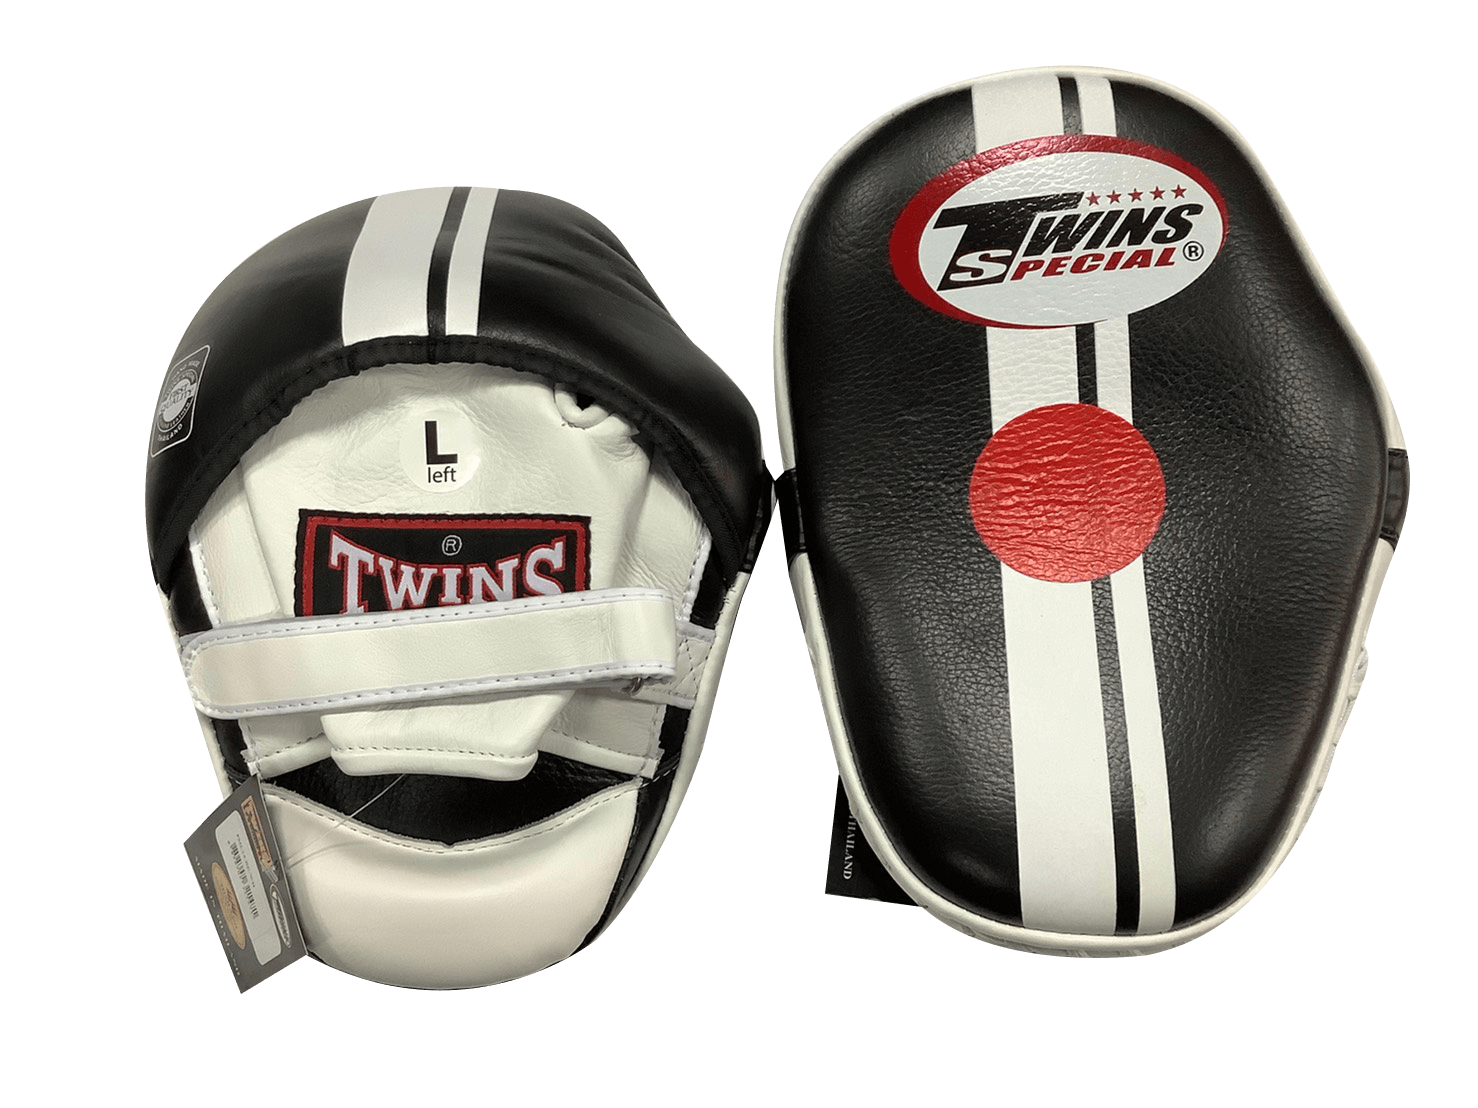 Twins Special Focus Mitts PML14 White Red - SUPER EXPORT SHOP